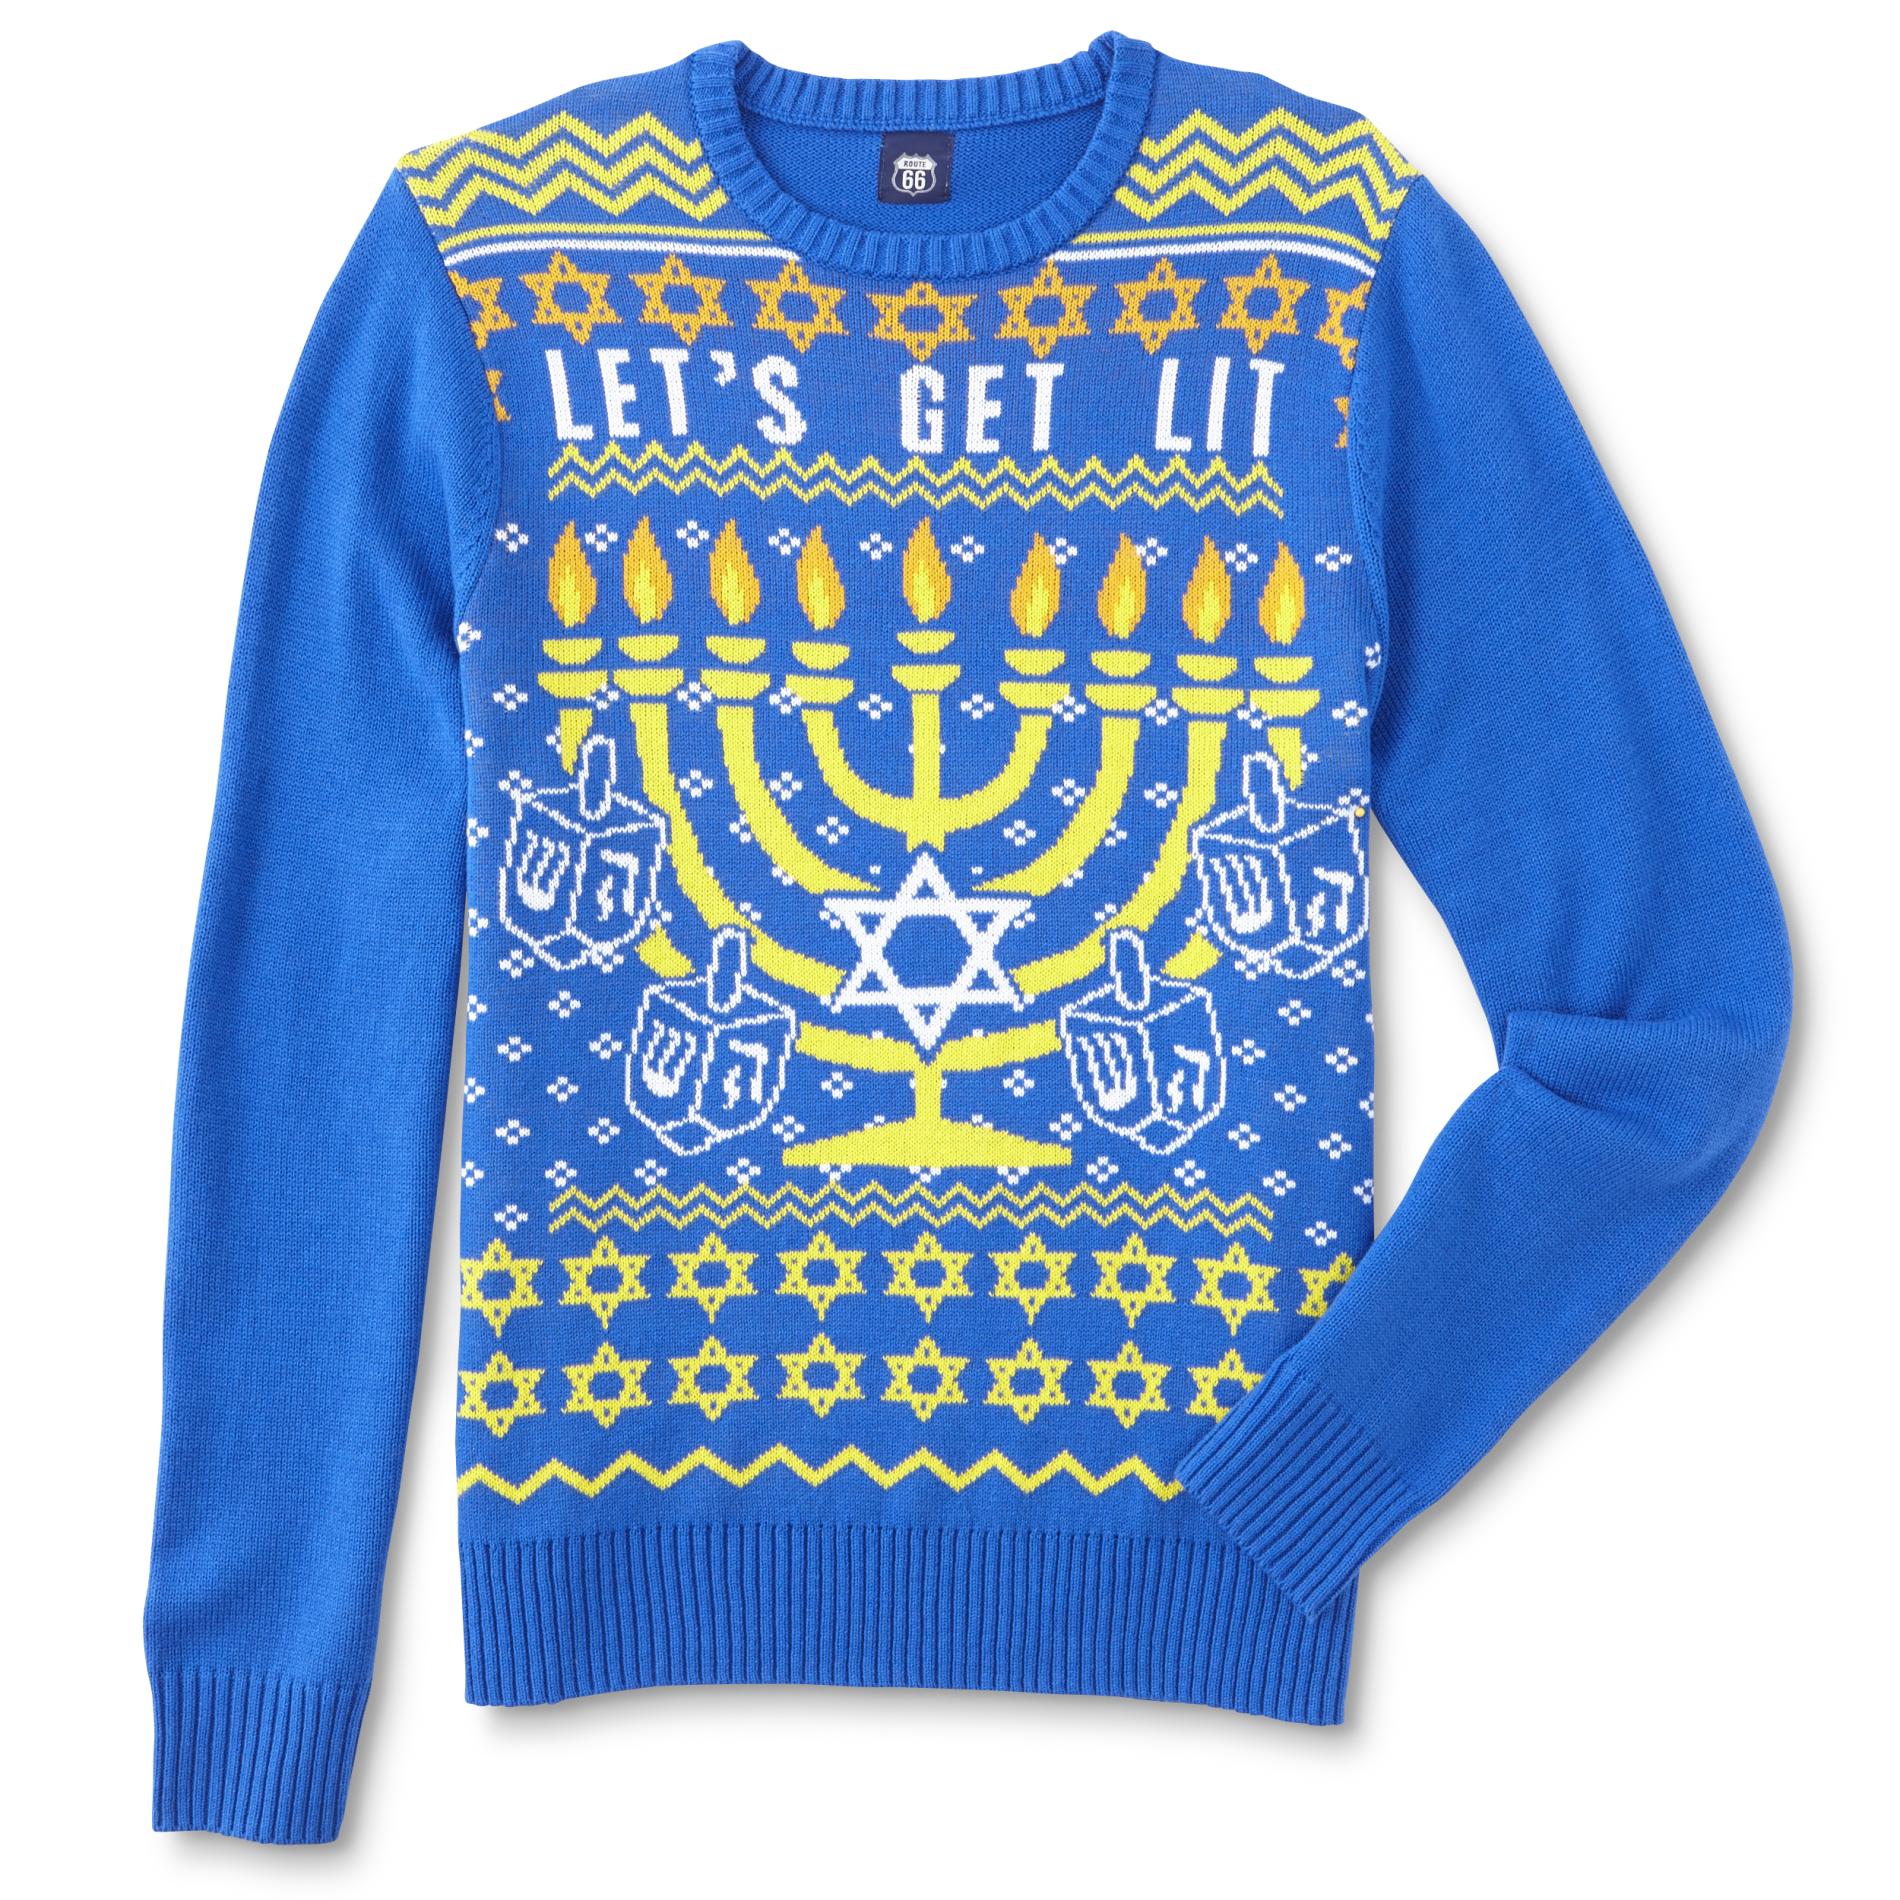 Route 66 Men's Ugly Holiday Sweater - Hanukkah